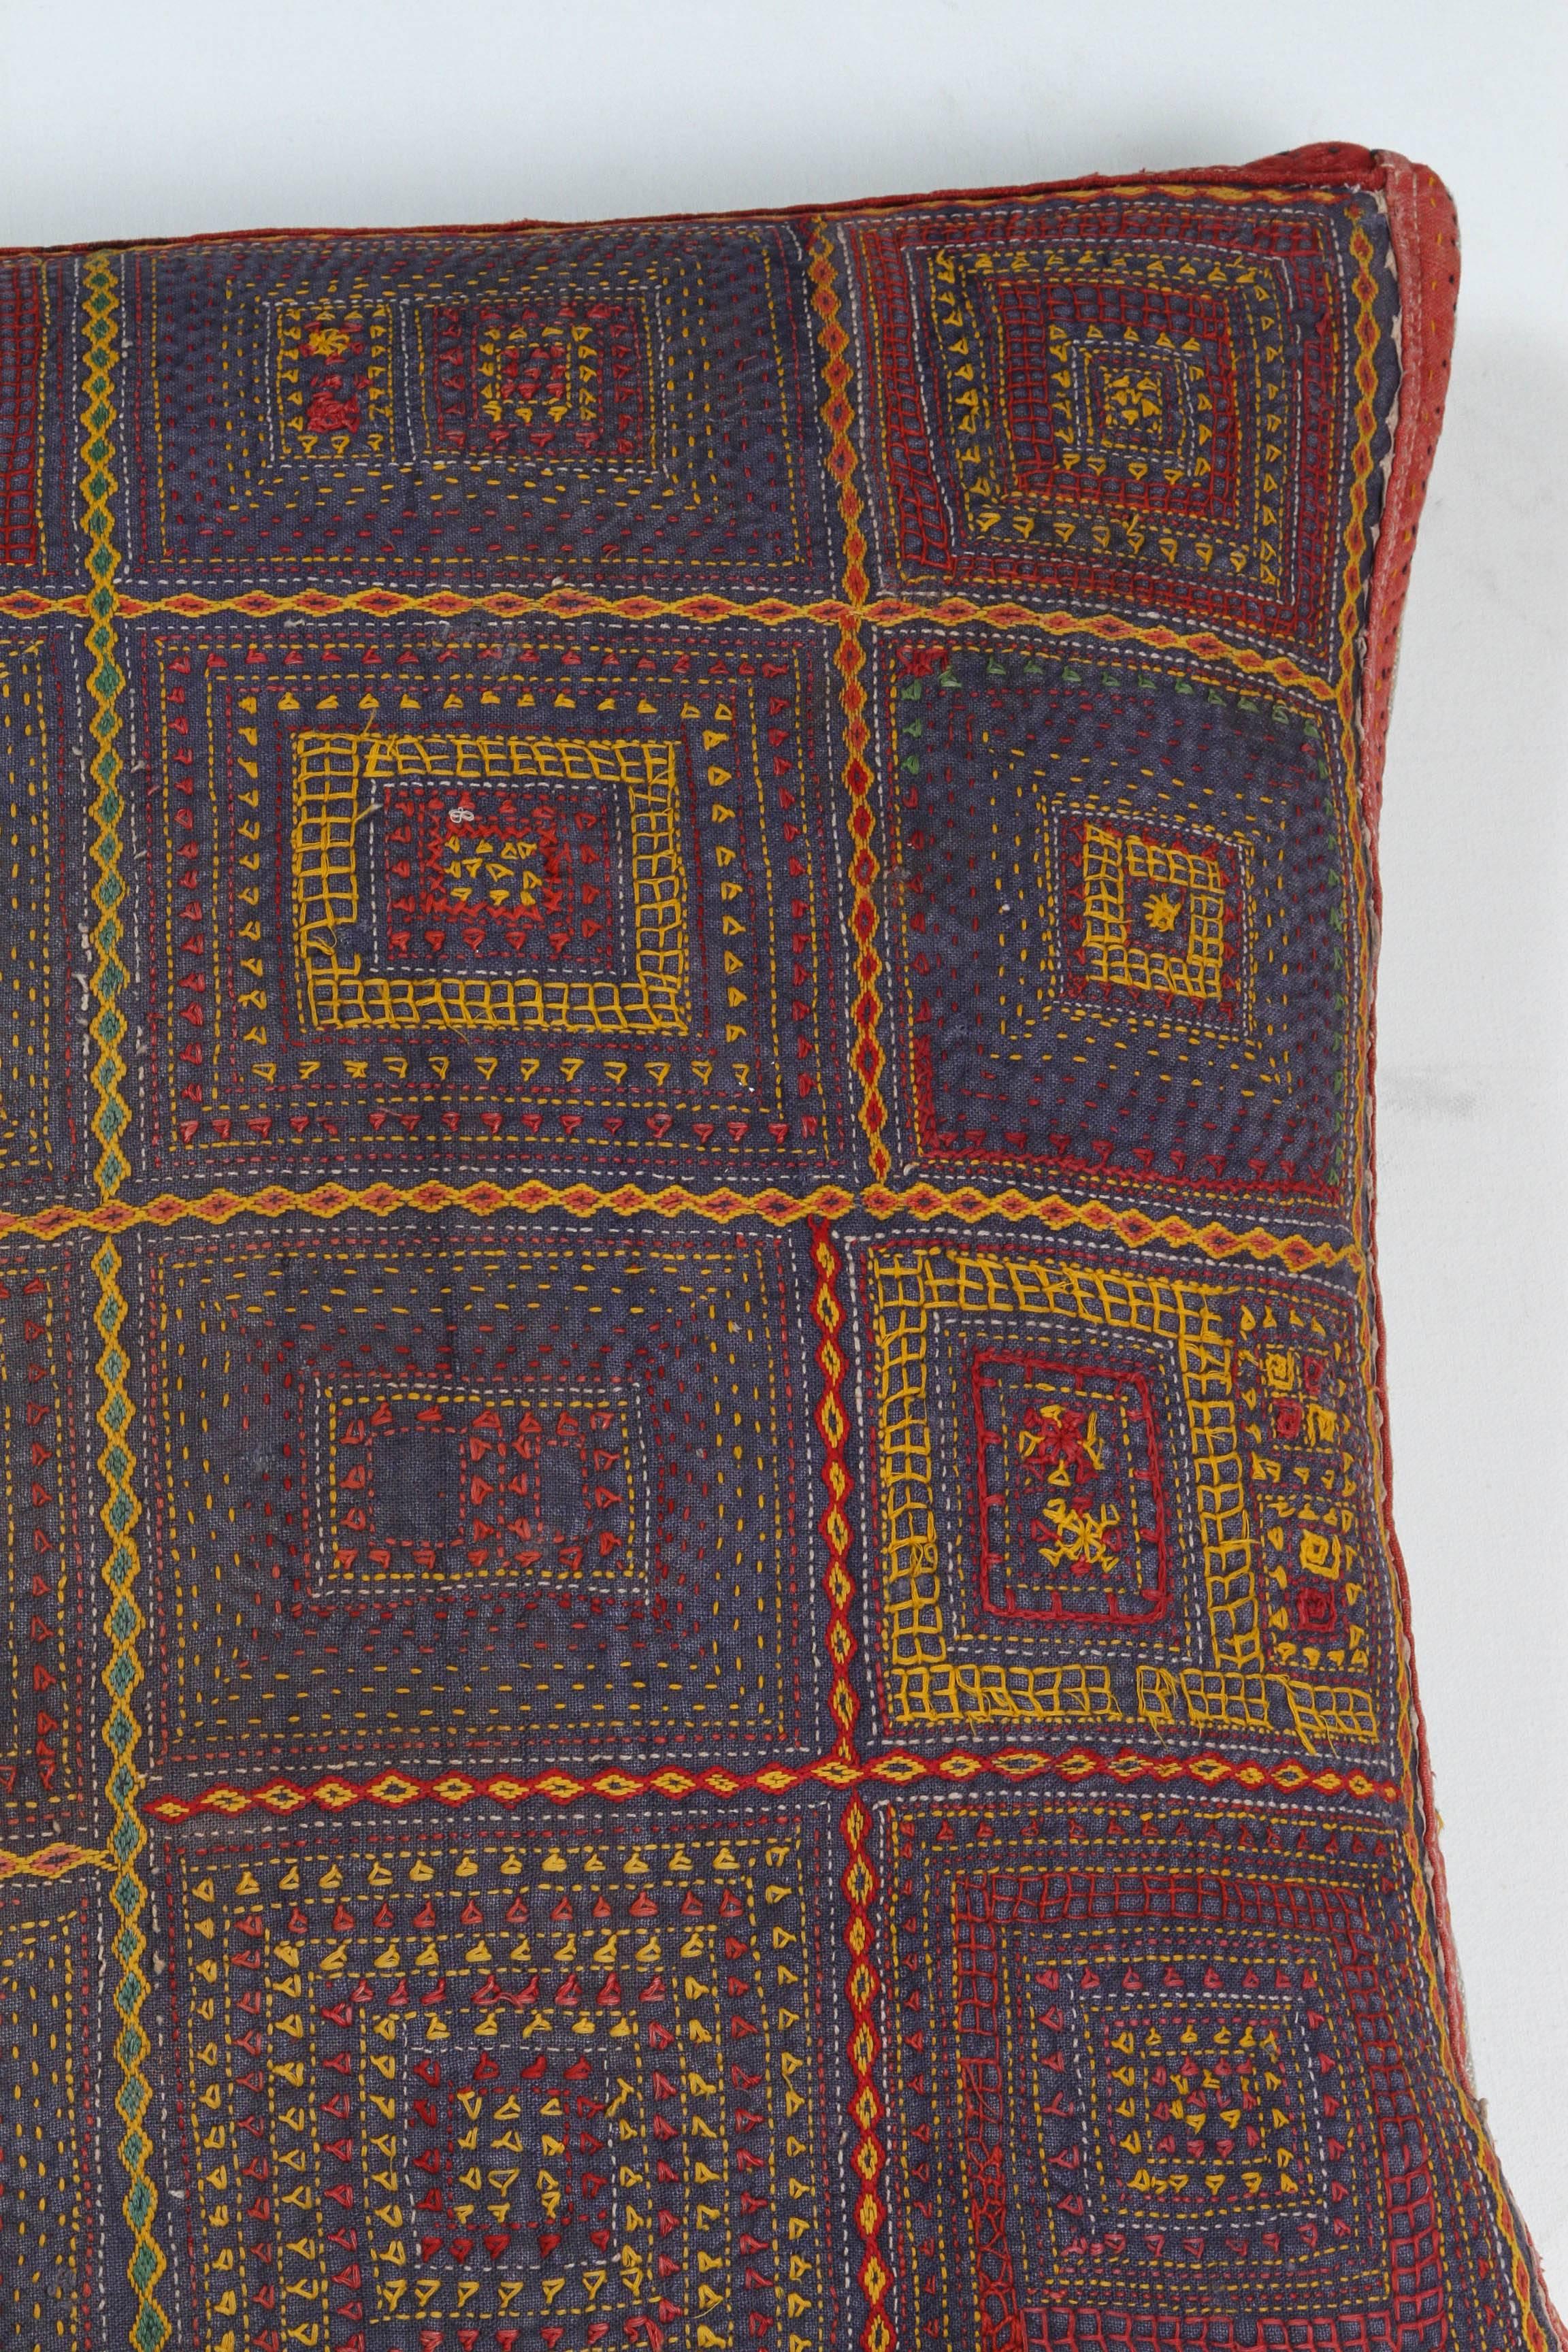 Indian Gujarati Embroidery Pillow, Geometric Motif, Blue, Orange, Yellow and Red For Sale